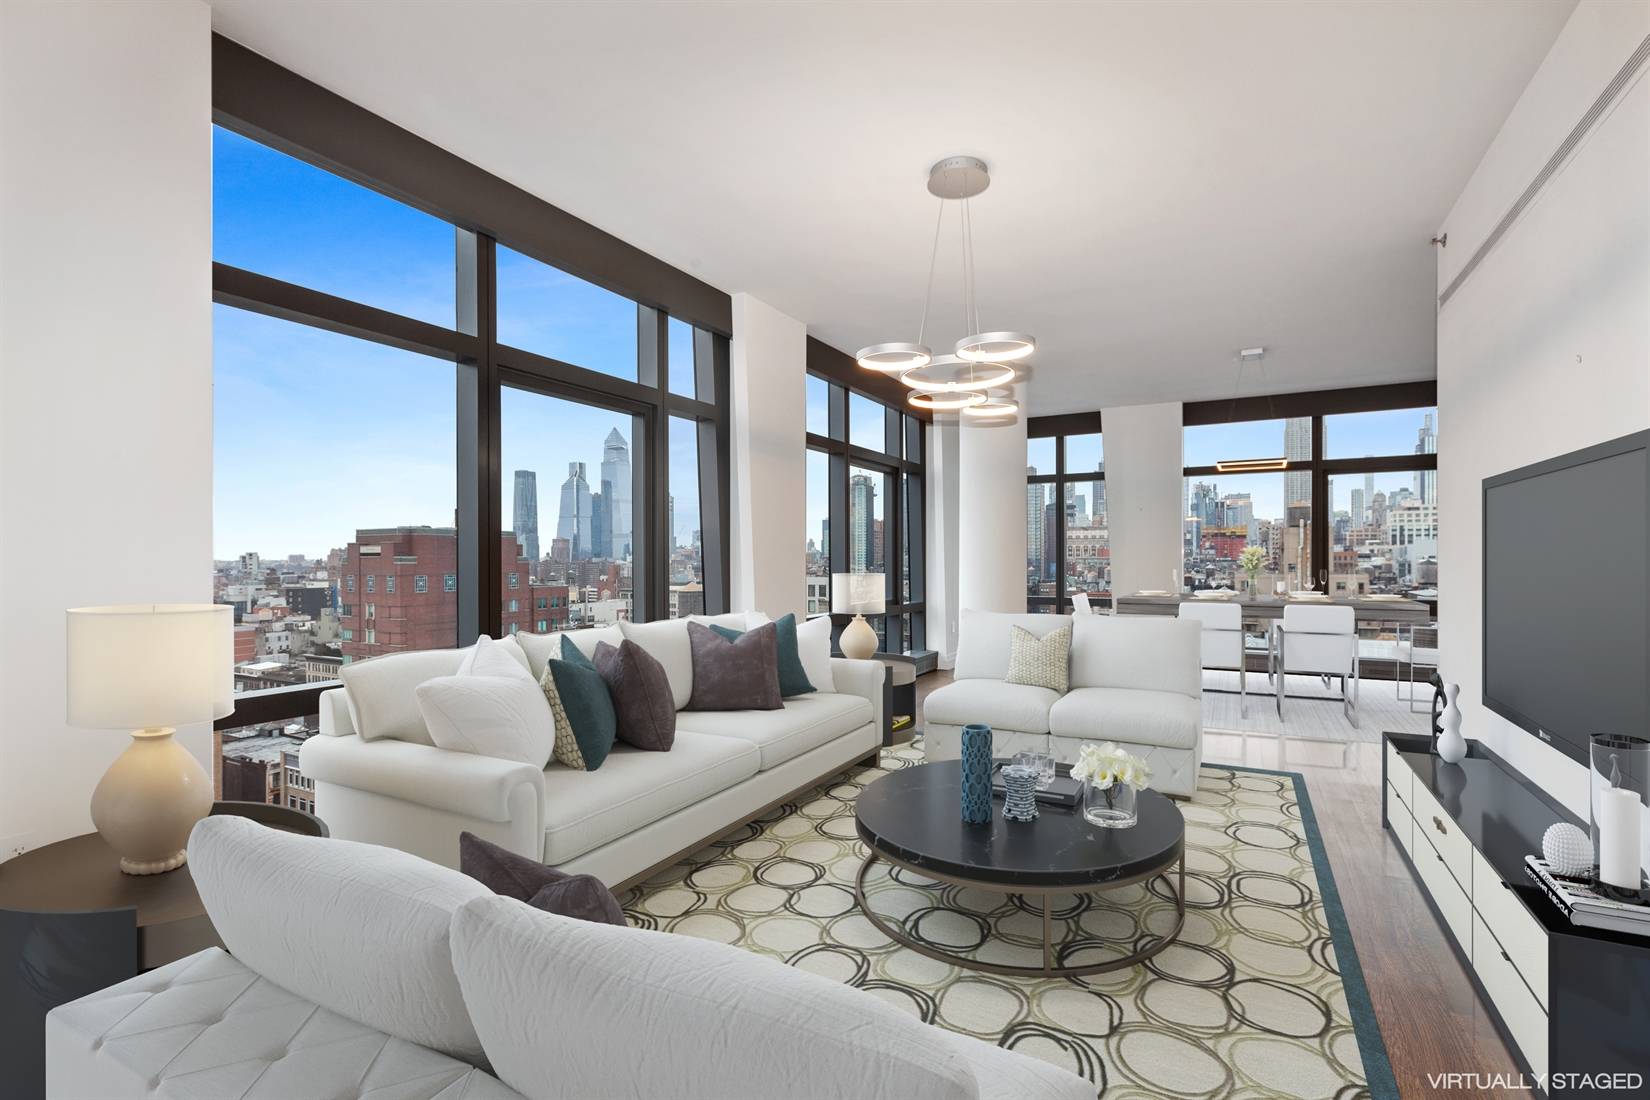 Perfectly situated between Chelsea, Greenwich Village, Flatiron, and Union Square is this striking and rare home at the intimate 35XV Condominium.